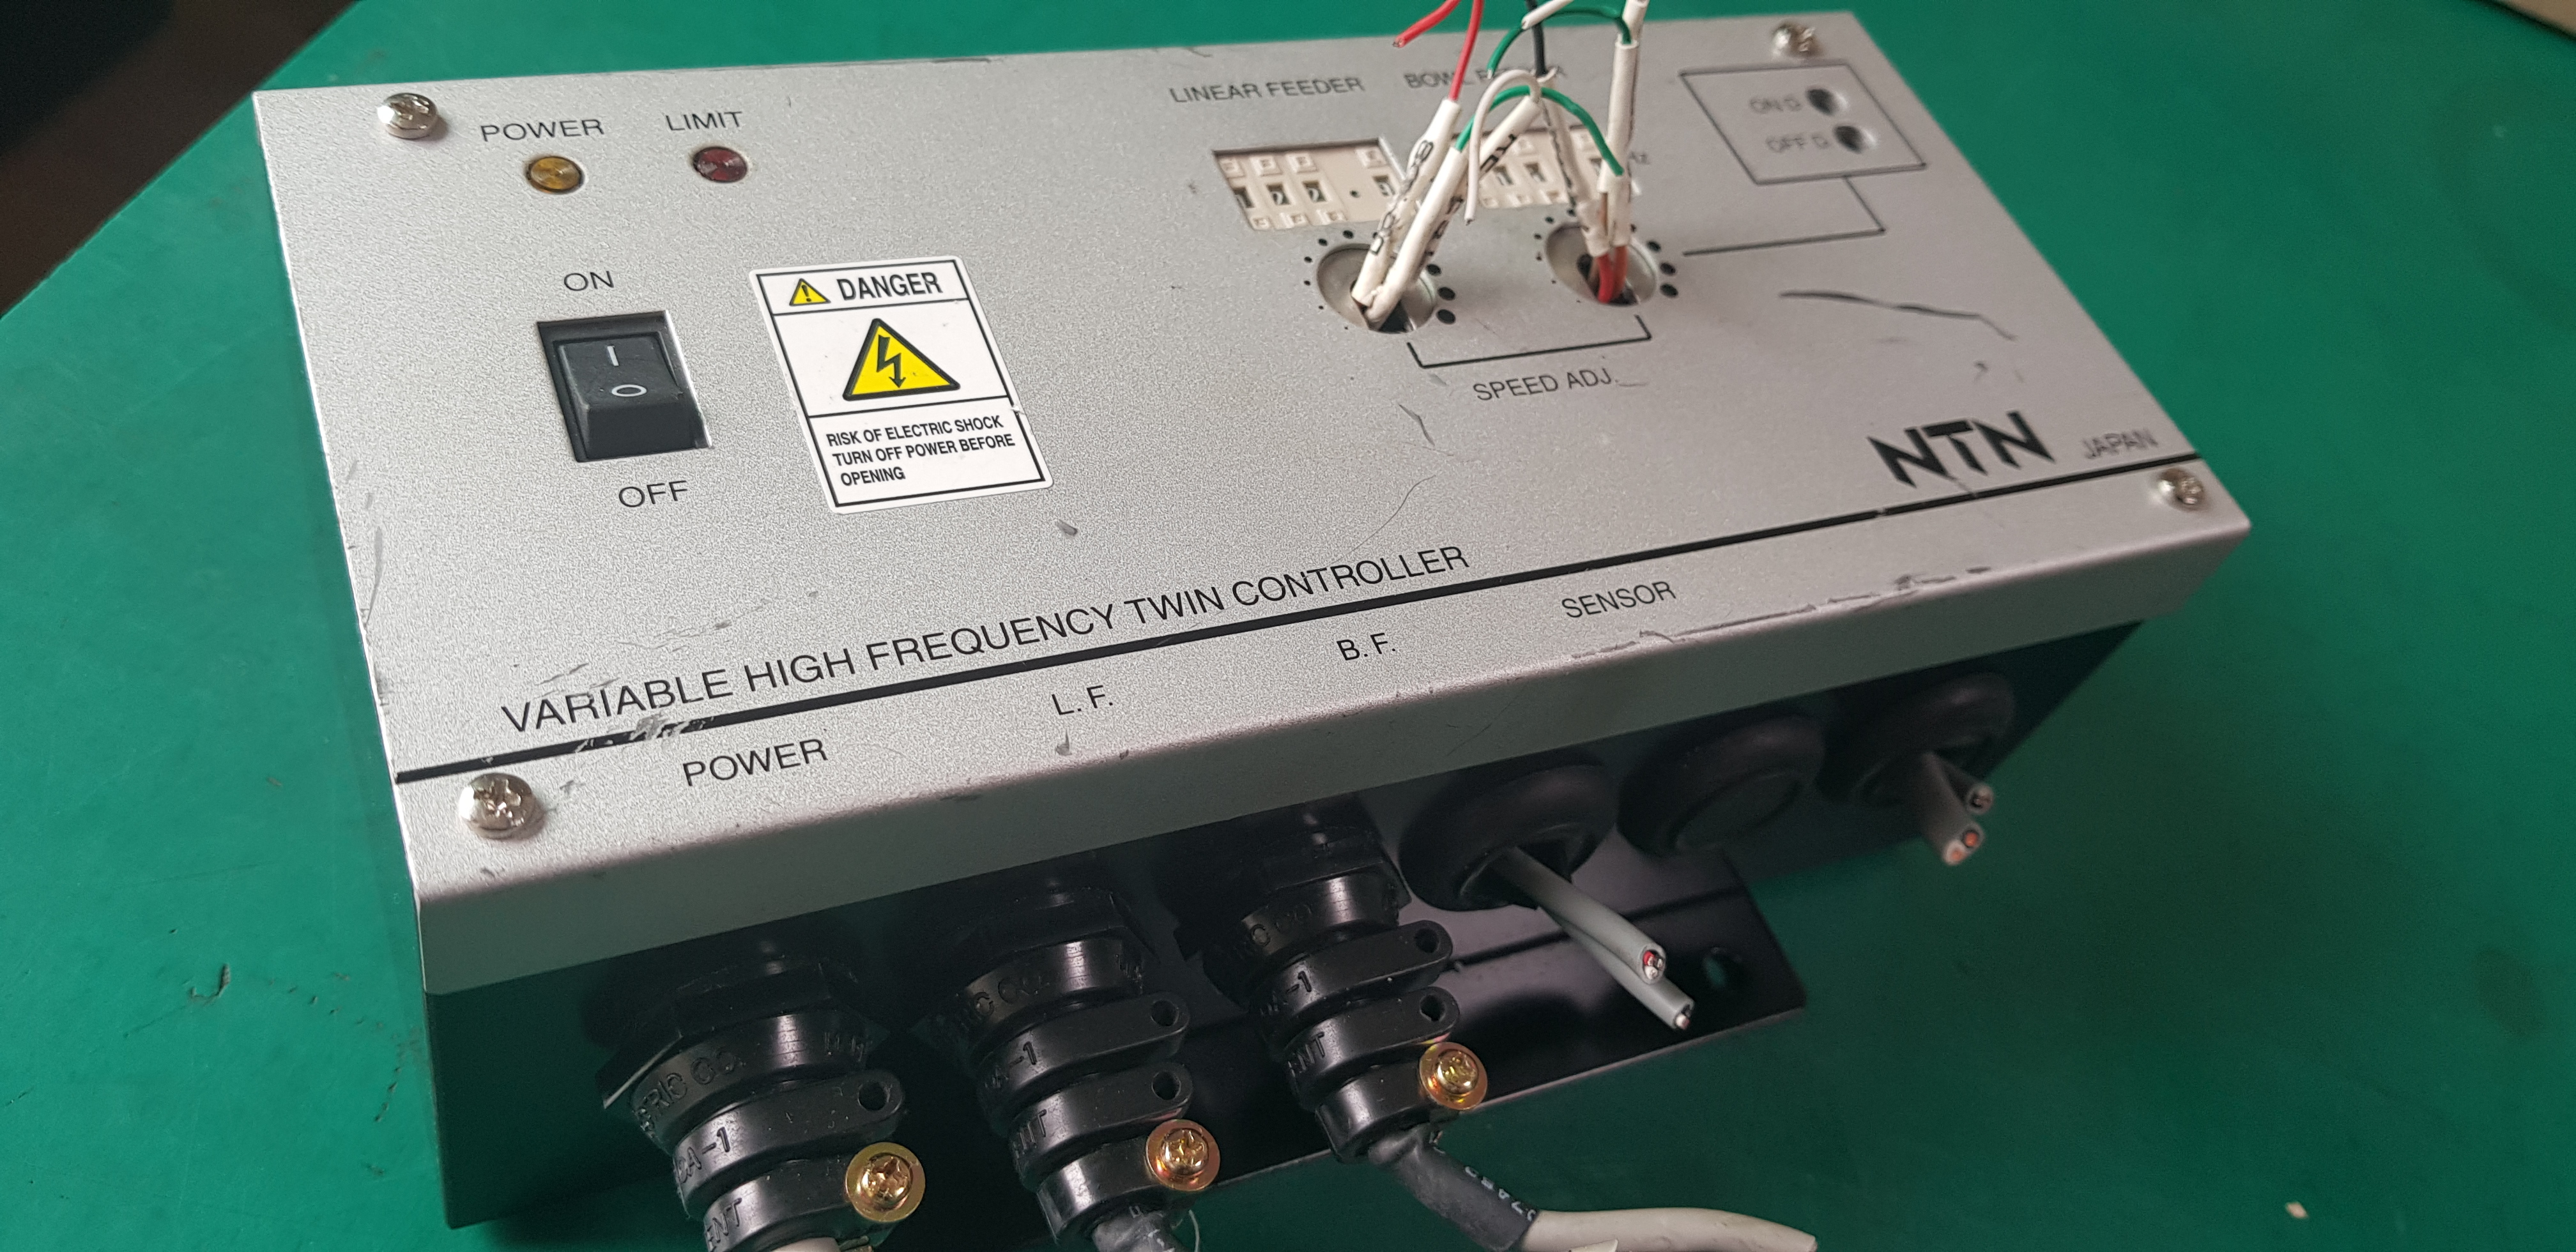 VARIABLE HIGH FREQUENCY TWIN CONTROLLER ET818 (중고)